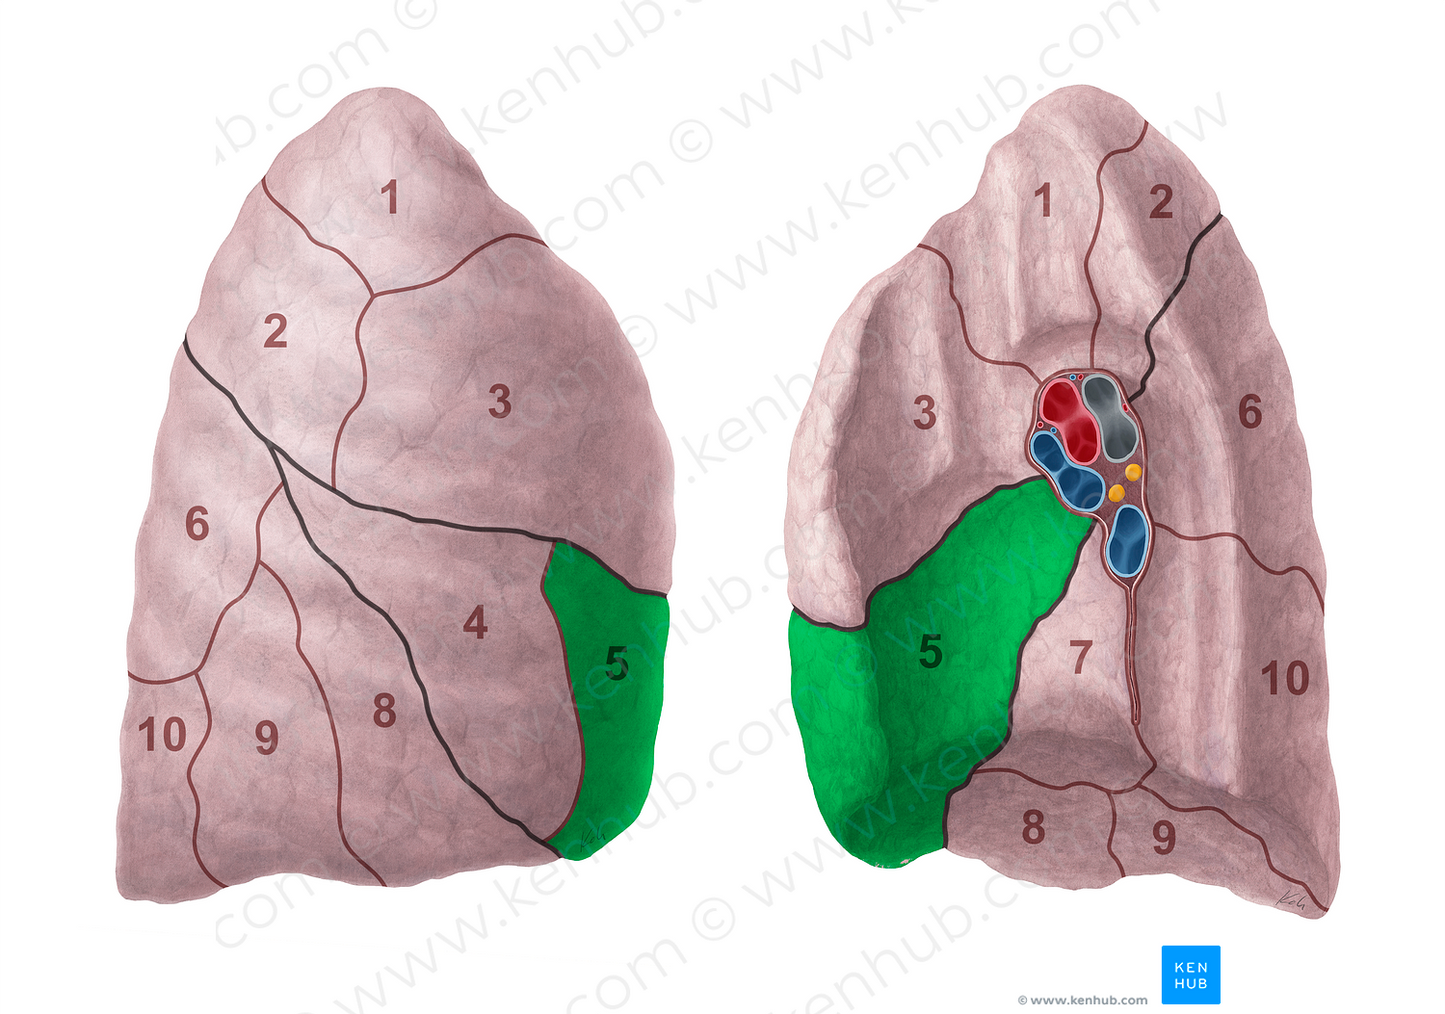 Medial segment of right lung (#20692)